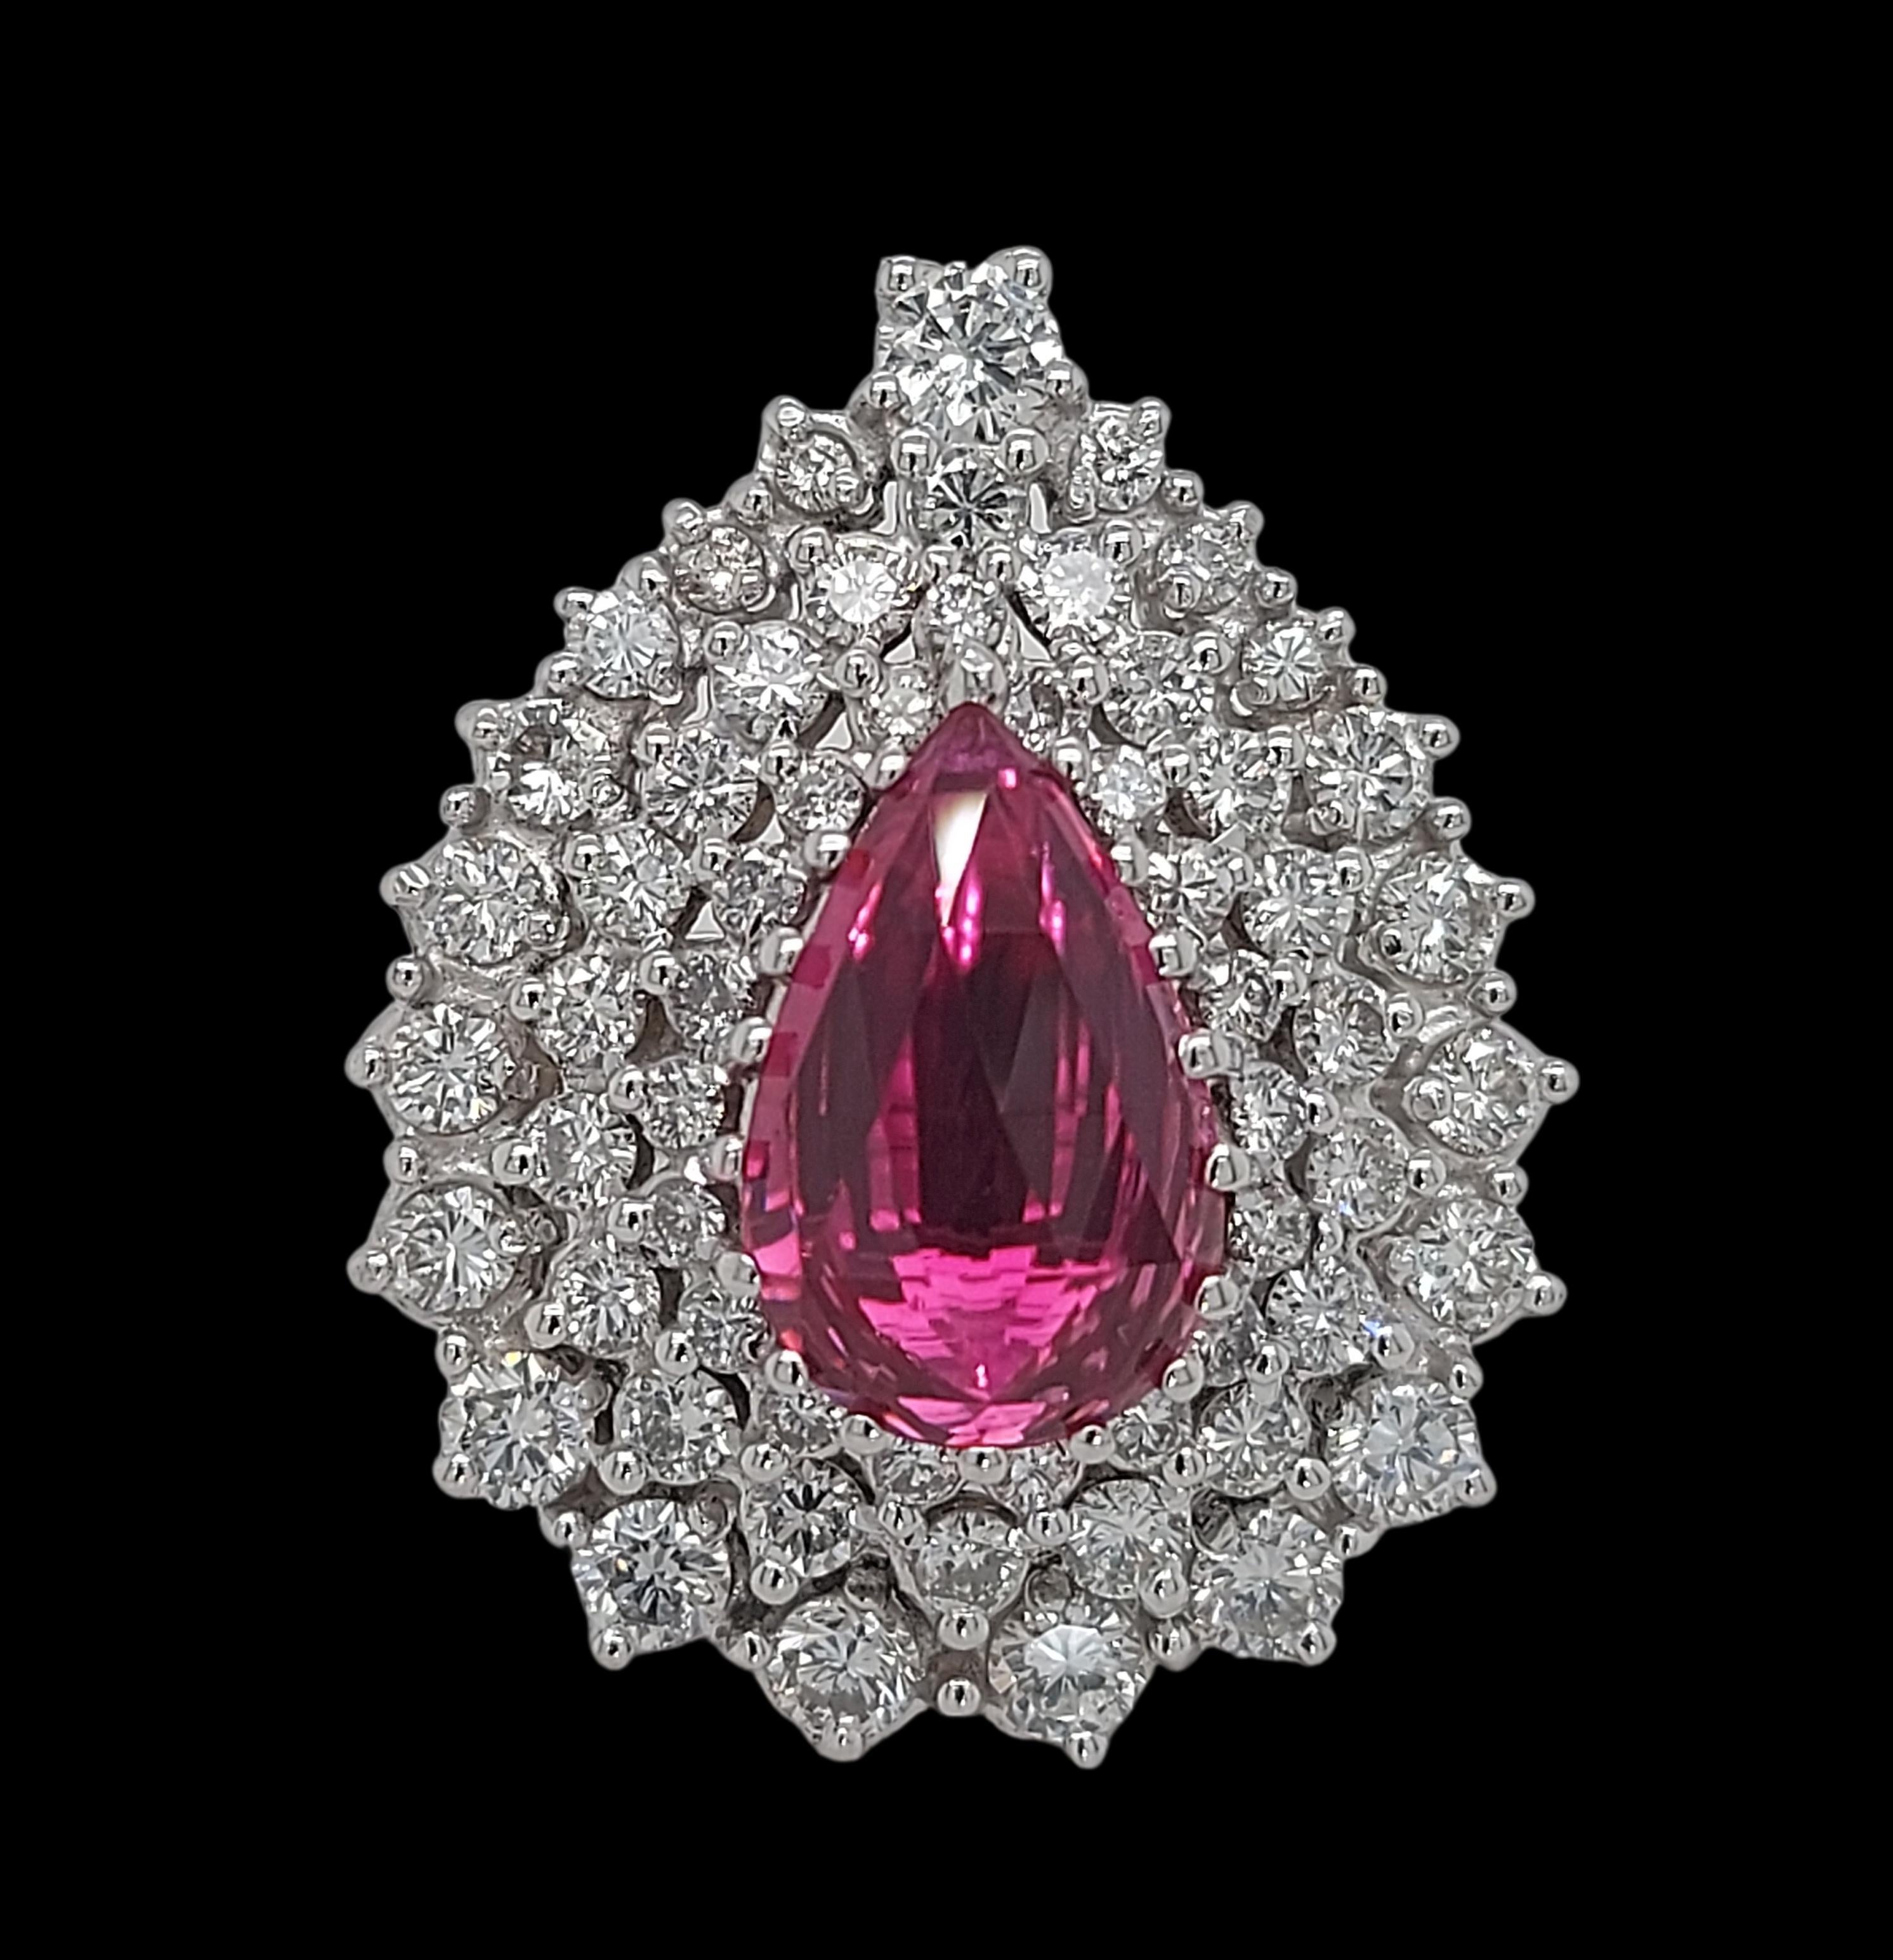 Magnificent ALGT Certified 18kt Gold 3.21 Ct Pear Rose Cut Fine Colour Ruby & Diamond Ring

Ruby: Pear shape, Rose cut Intense purplish red Ruby 3.21ct

Diamond: 3 Rows of Brilliant Cut Diamonds

Material: 18kt White Gold

Ring size: 55.1 EU / 7.25